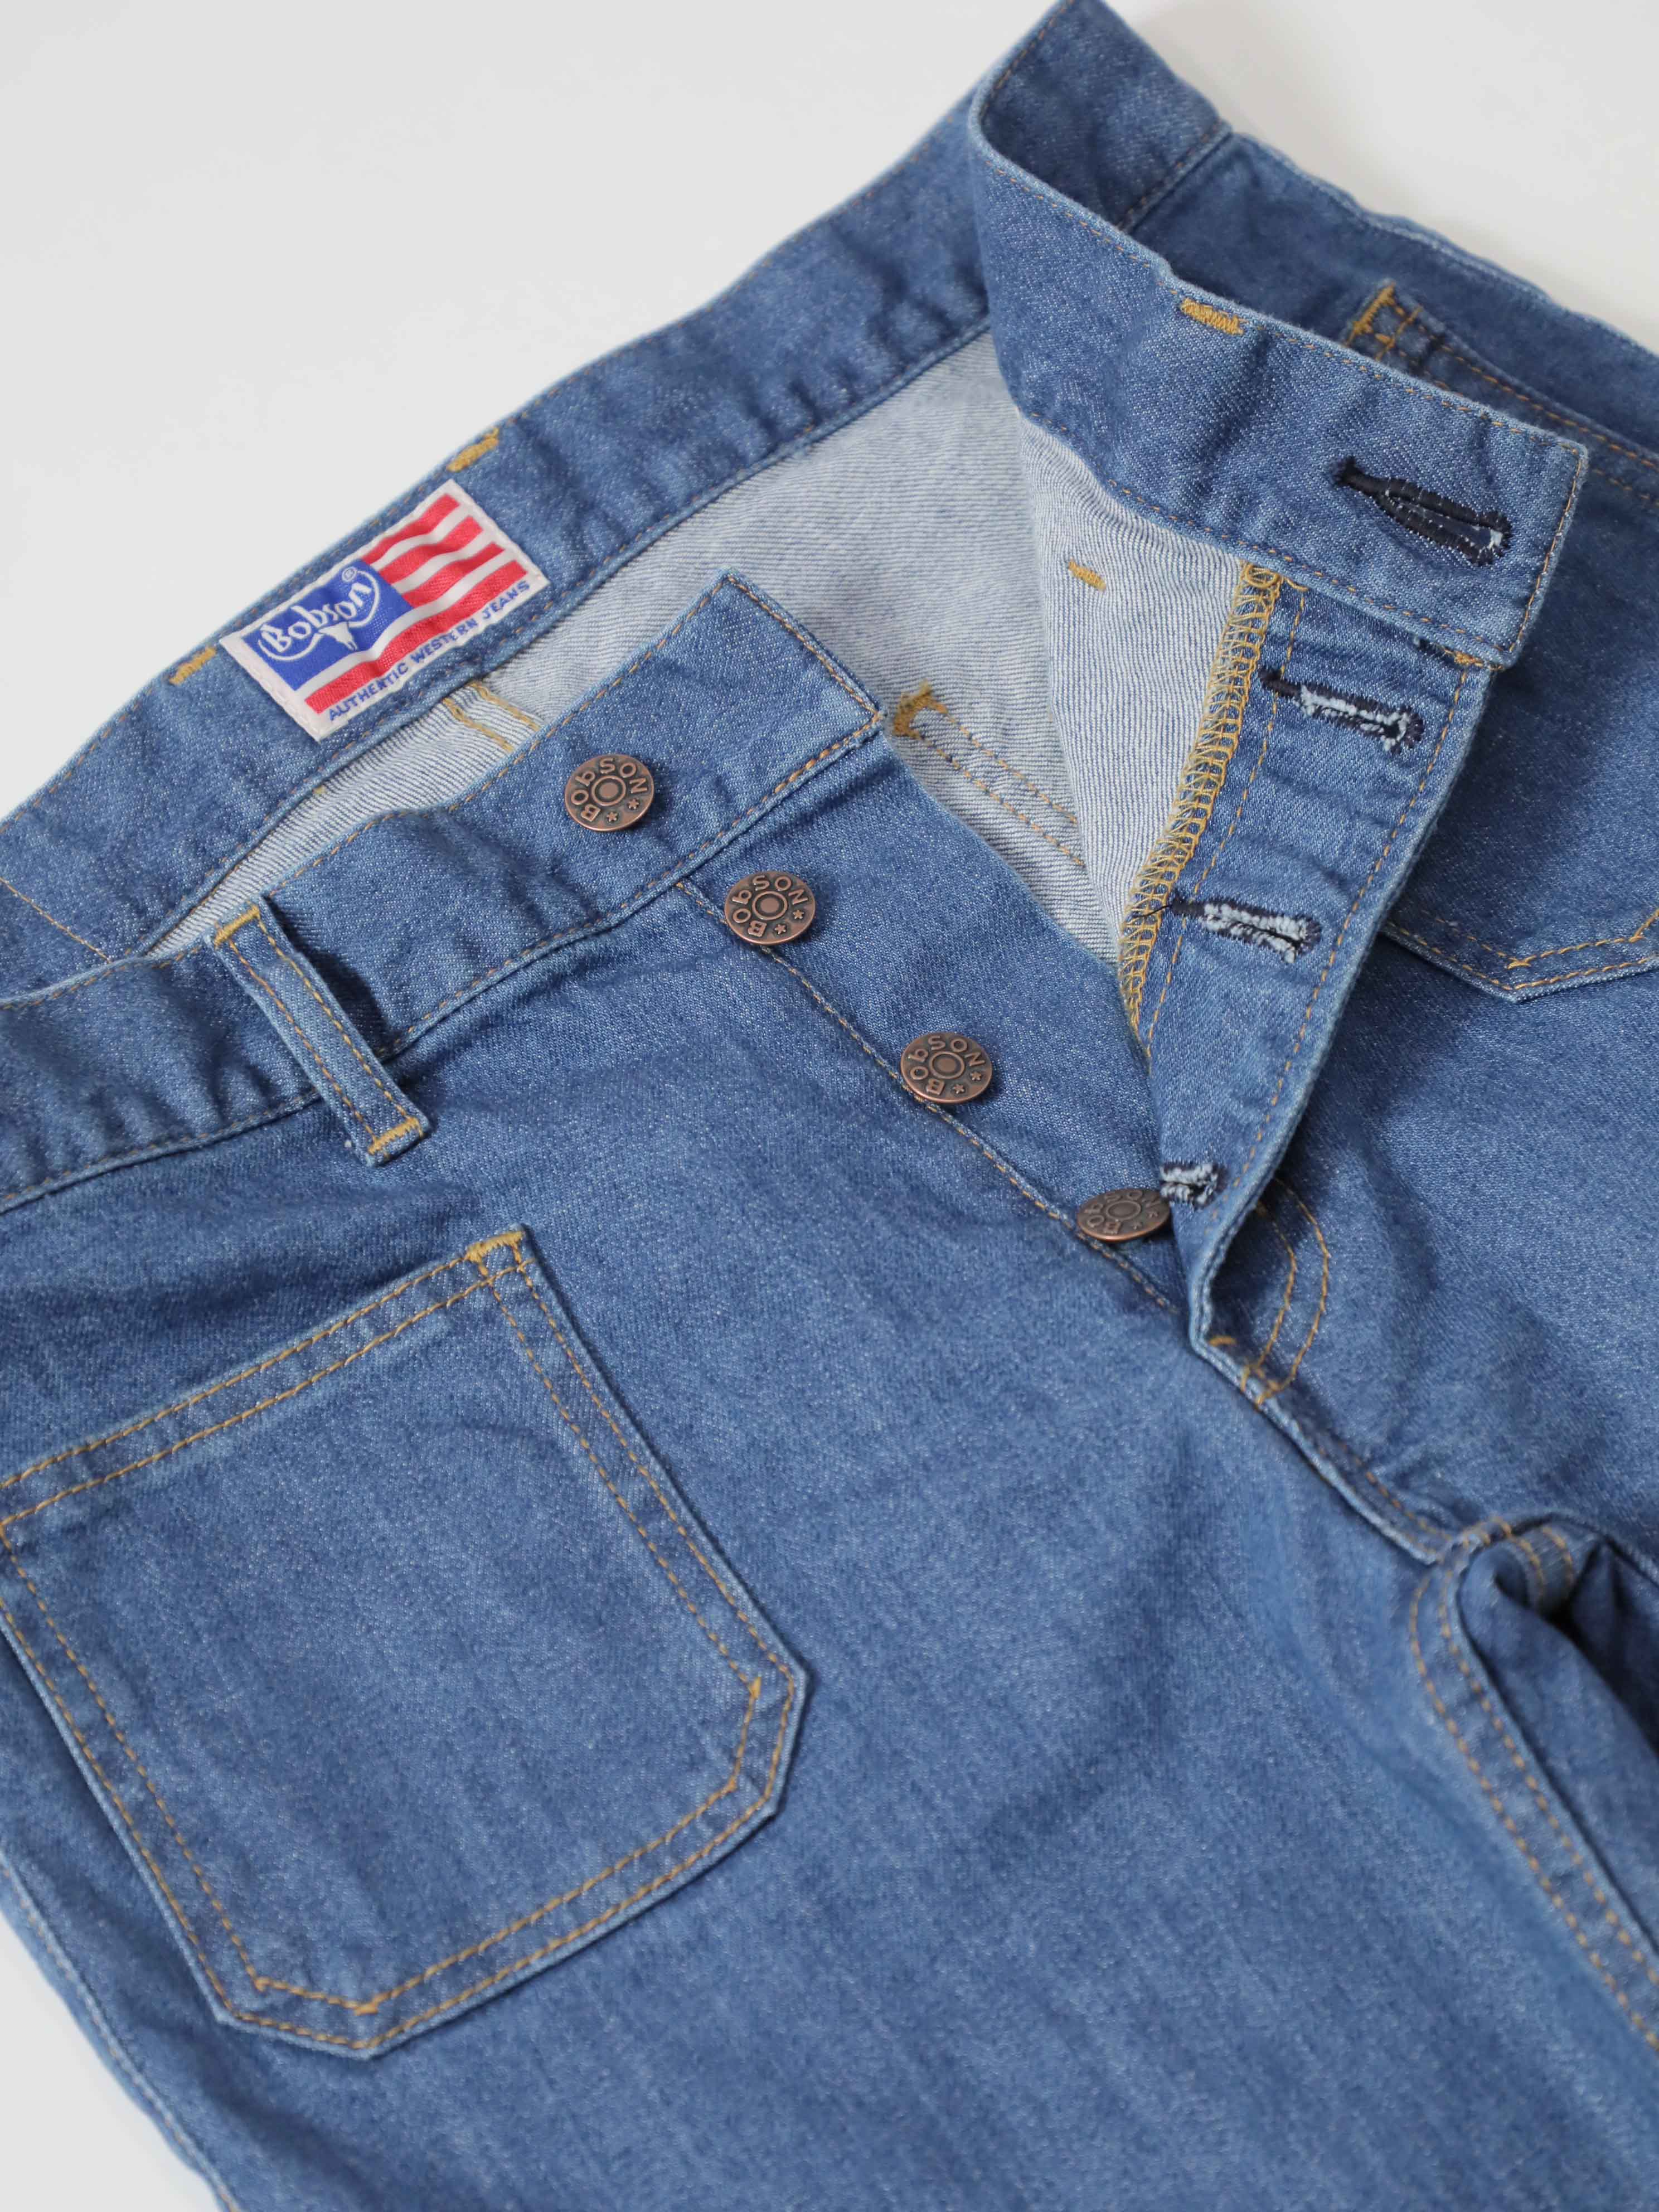 Patch Pocket Bell Bottom Jeans Type 550 Reproduction Bleached